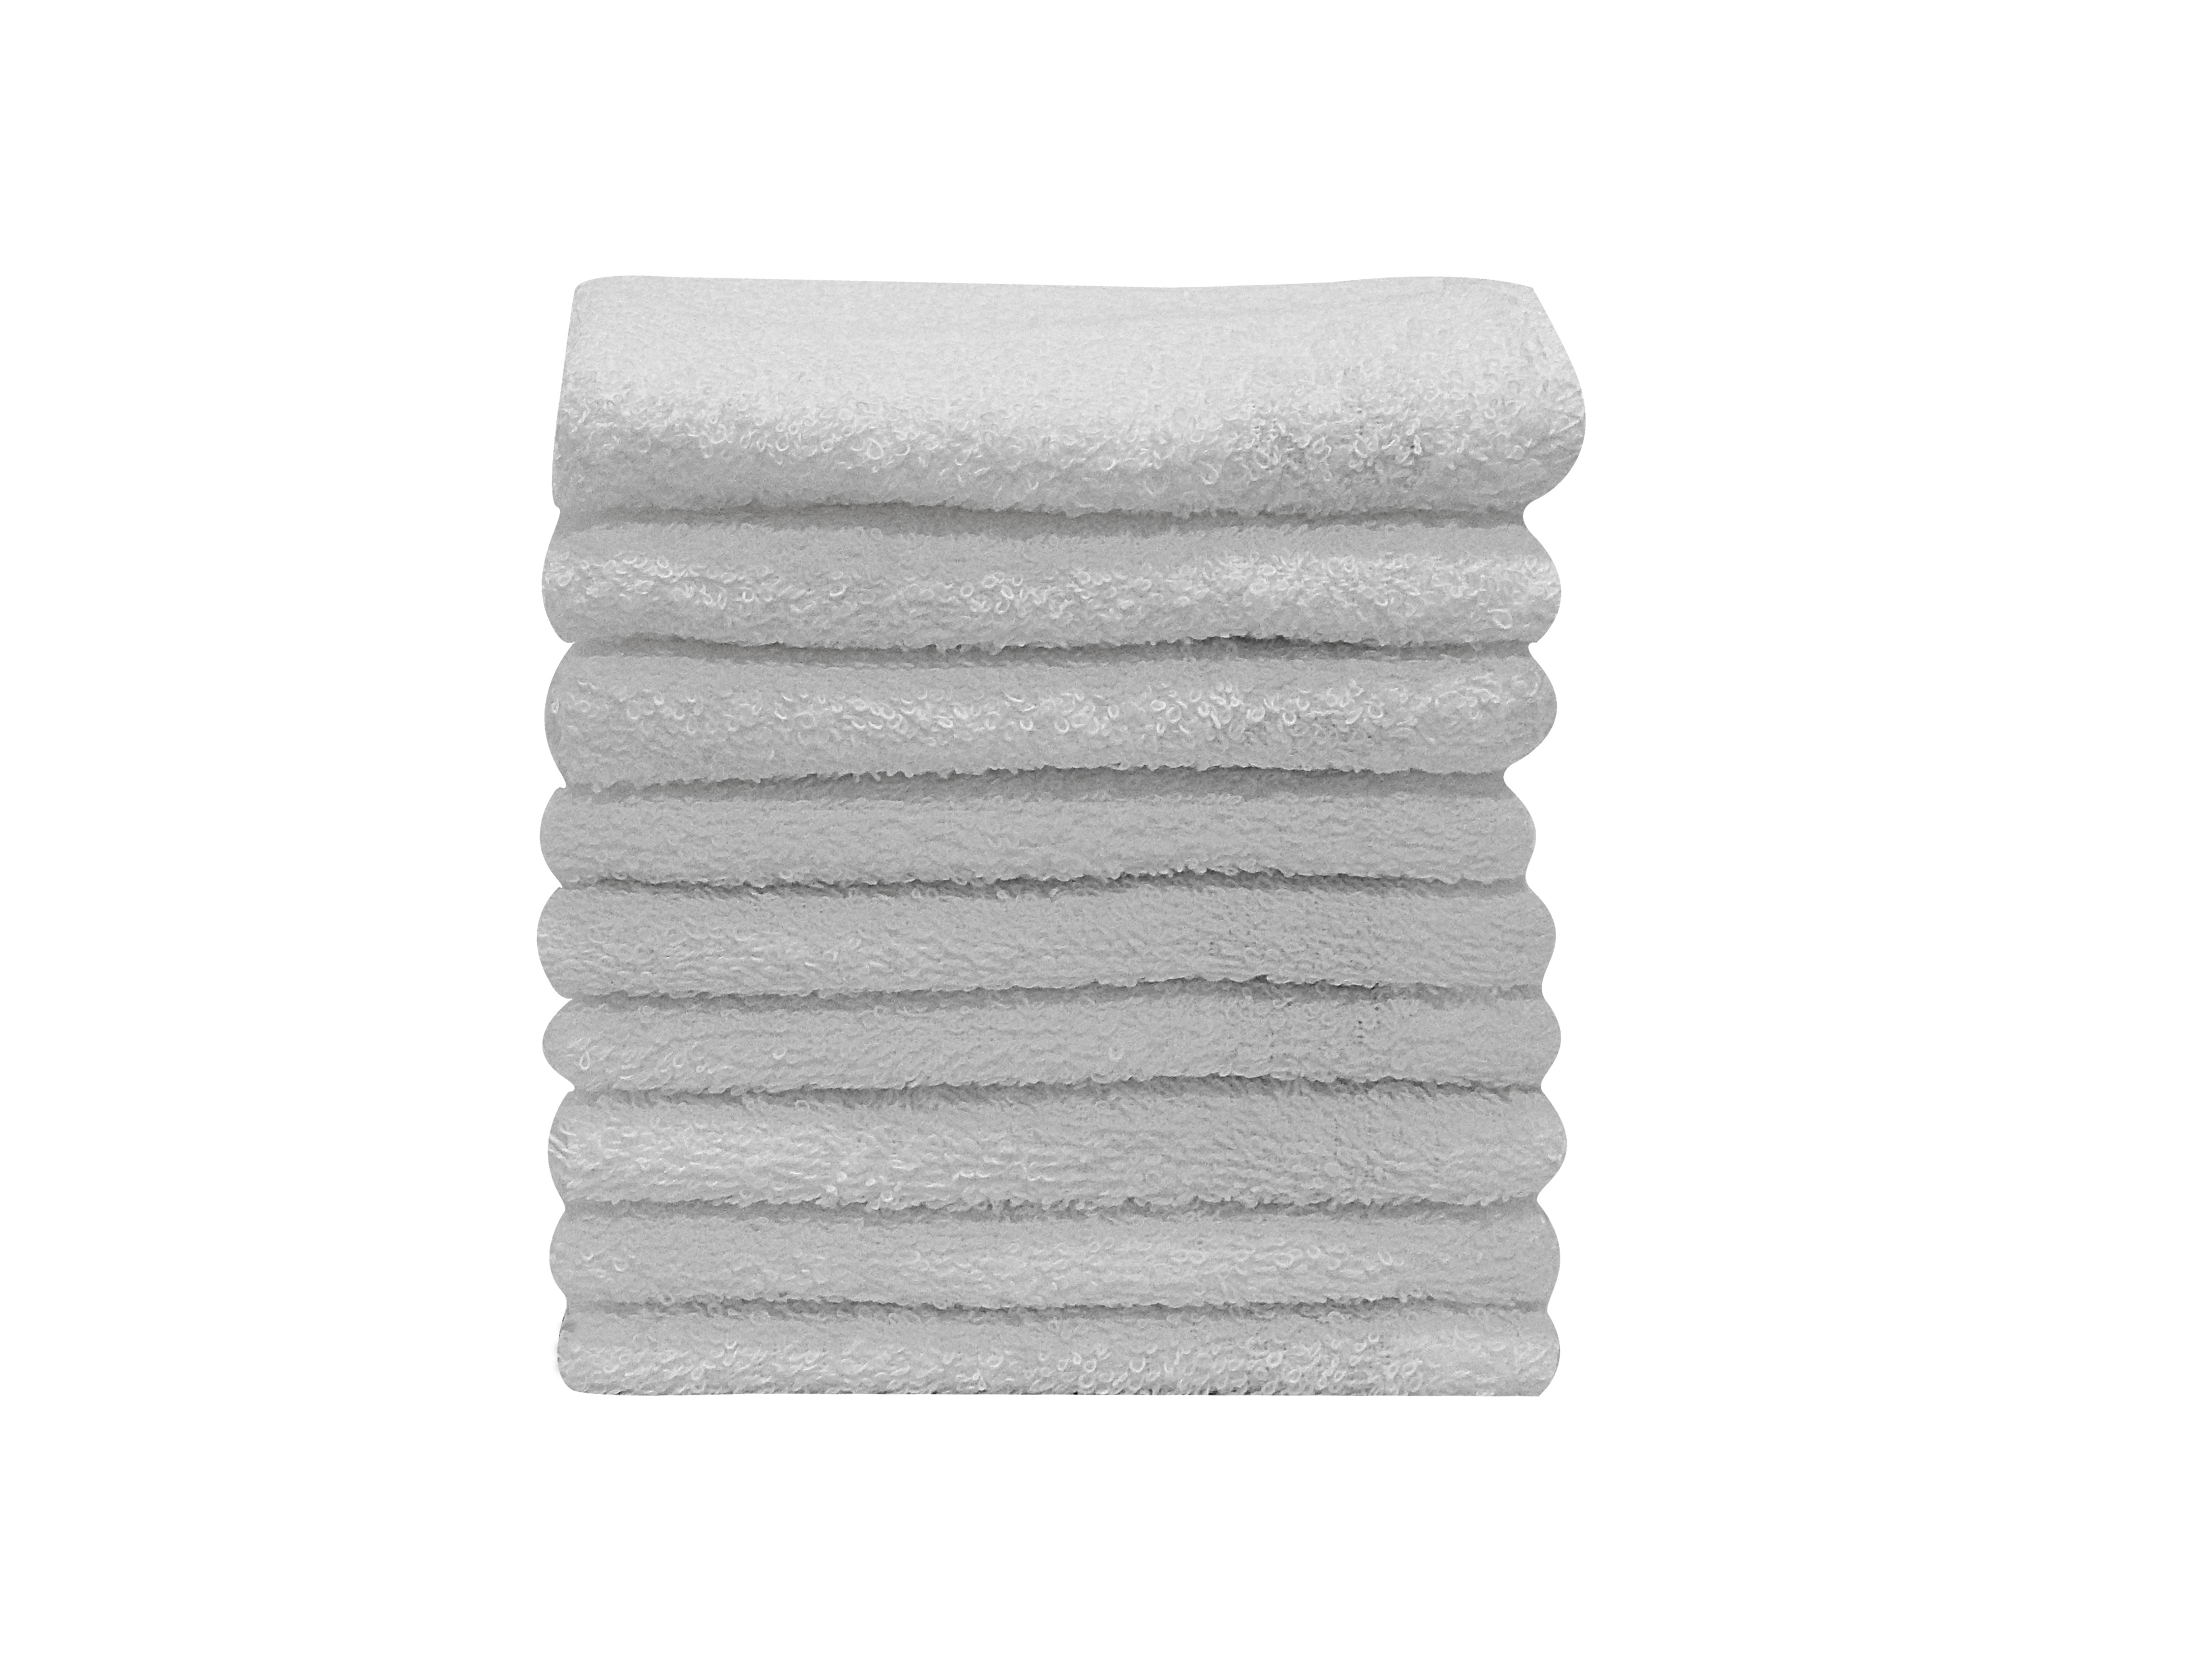 68cm x 45cm Pack of 6 Durable and Machine Washable Kitchen Towels for drying dishes Lint-Free HomeKnit Super Absorbent Tea Towels 100% Cotton Soft Fast Drying Waffle Dish Towels for Kitchen 